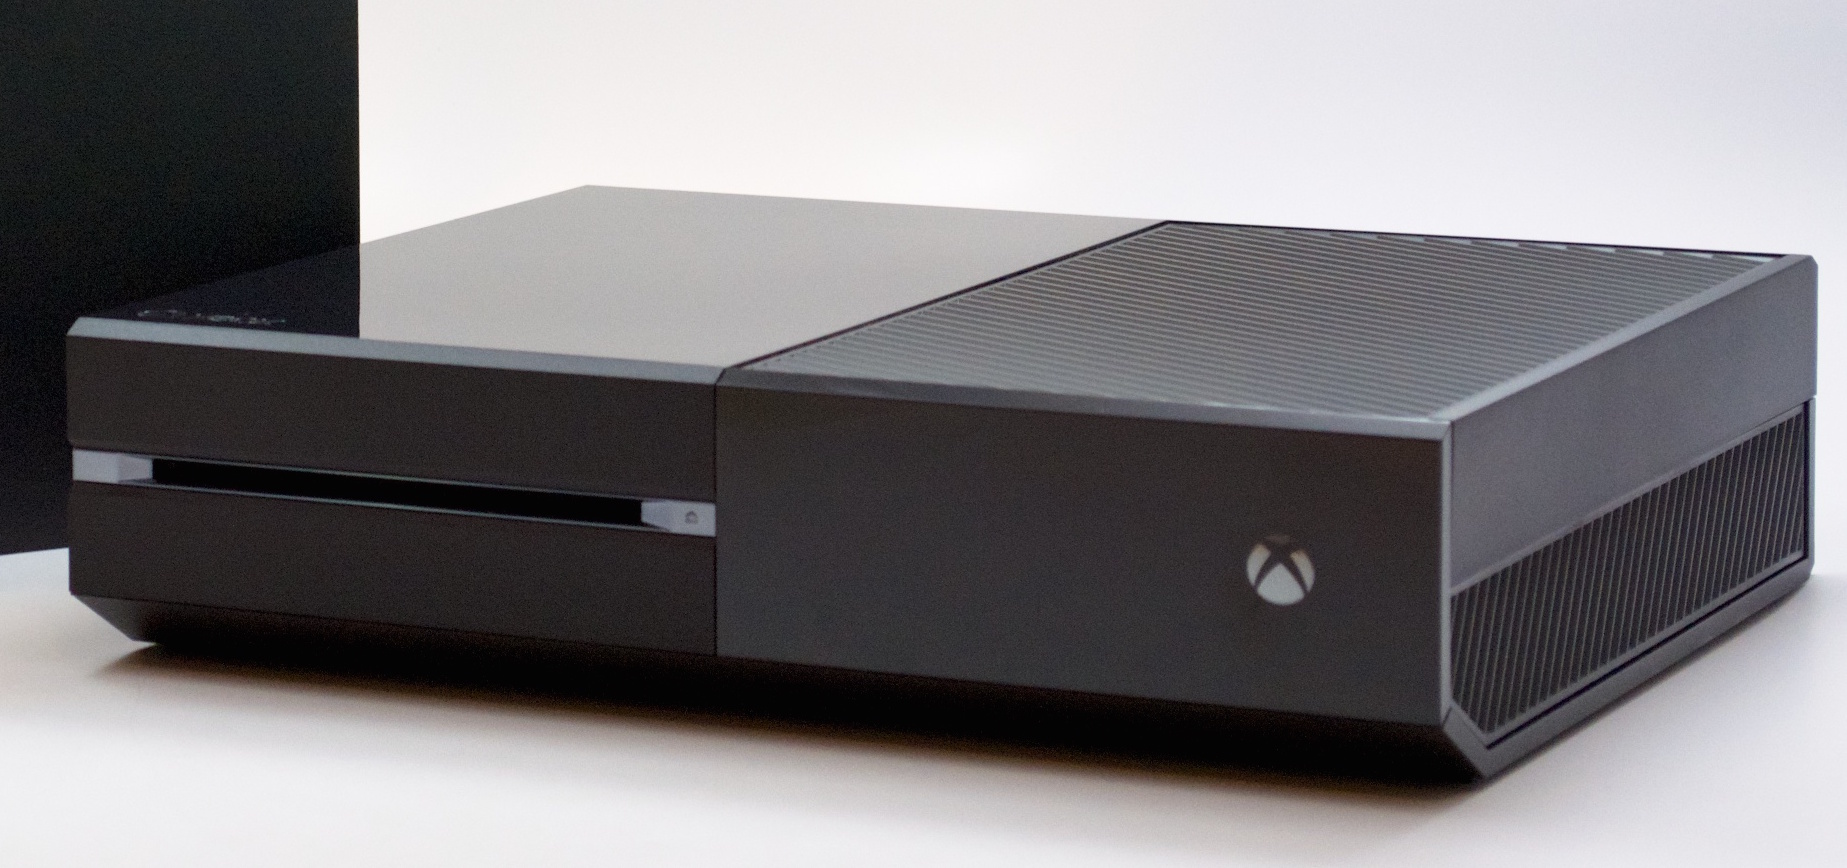 Here's why you shouldn't buy the Xbox One yet.